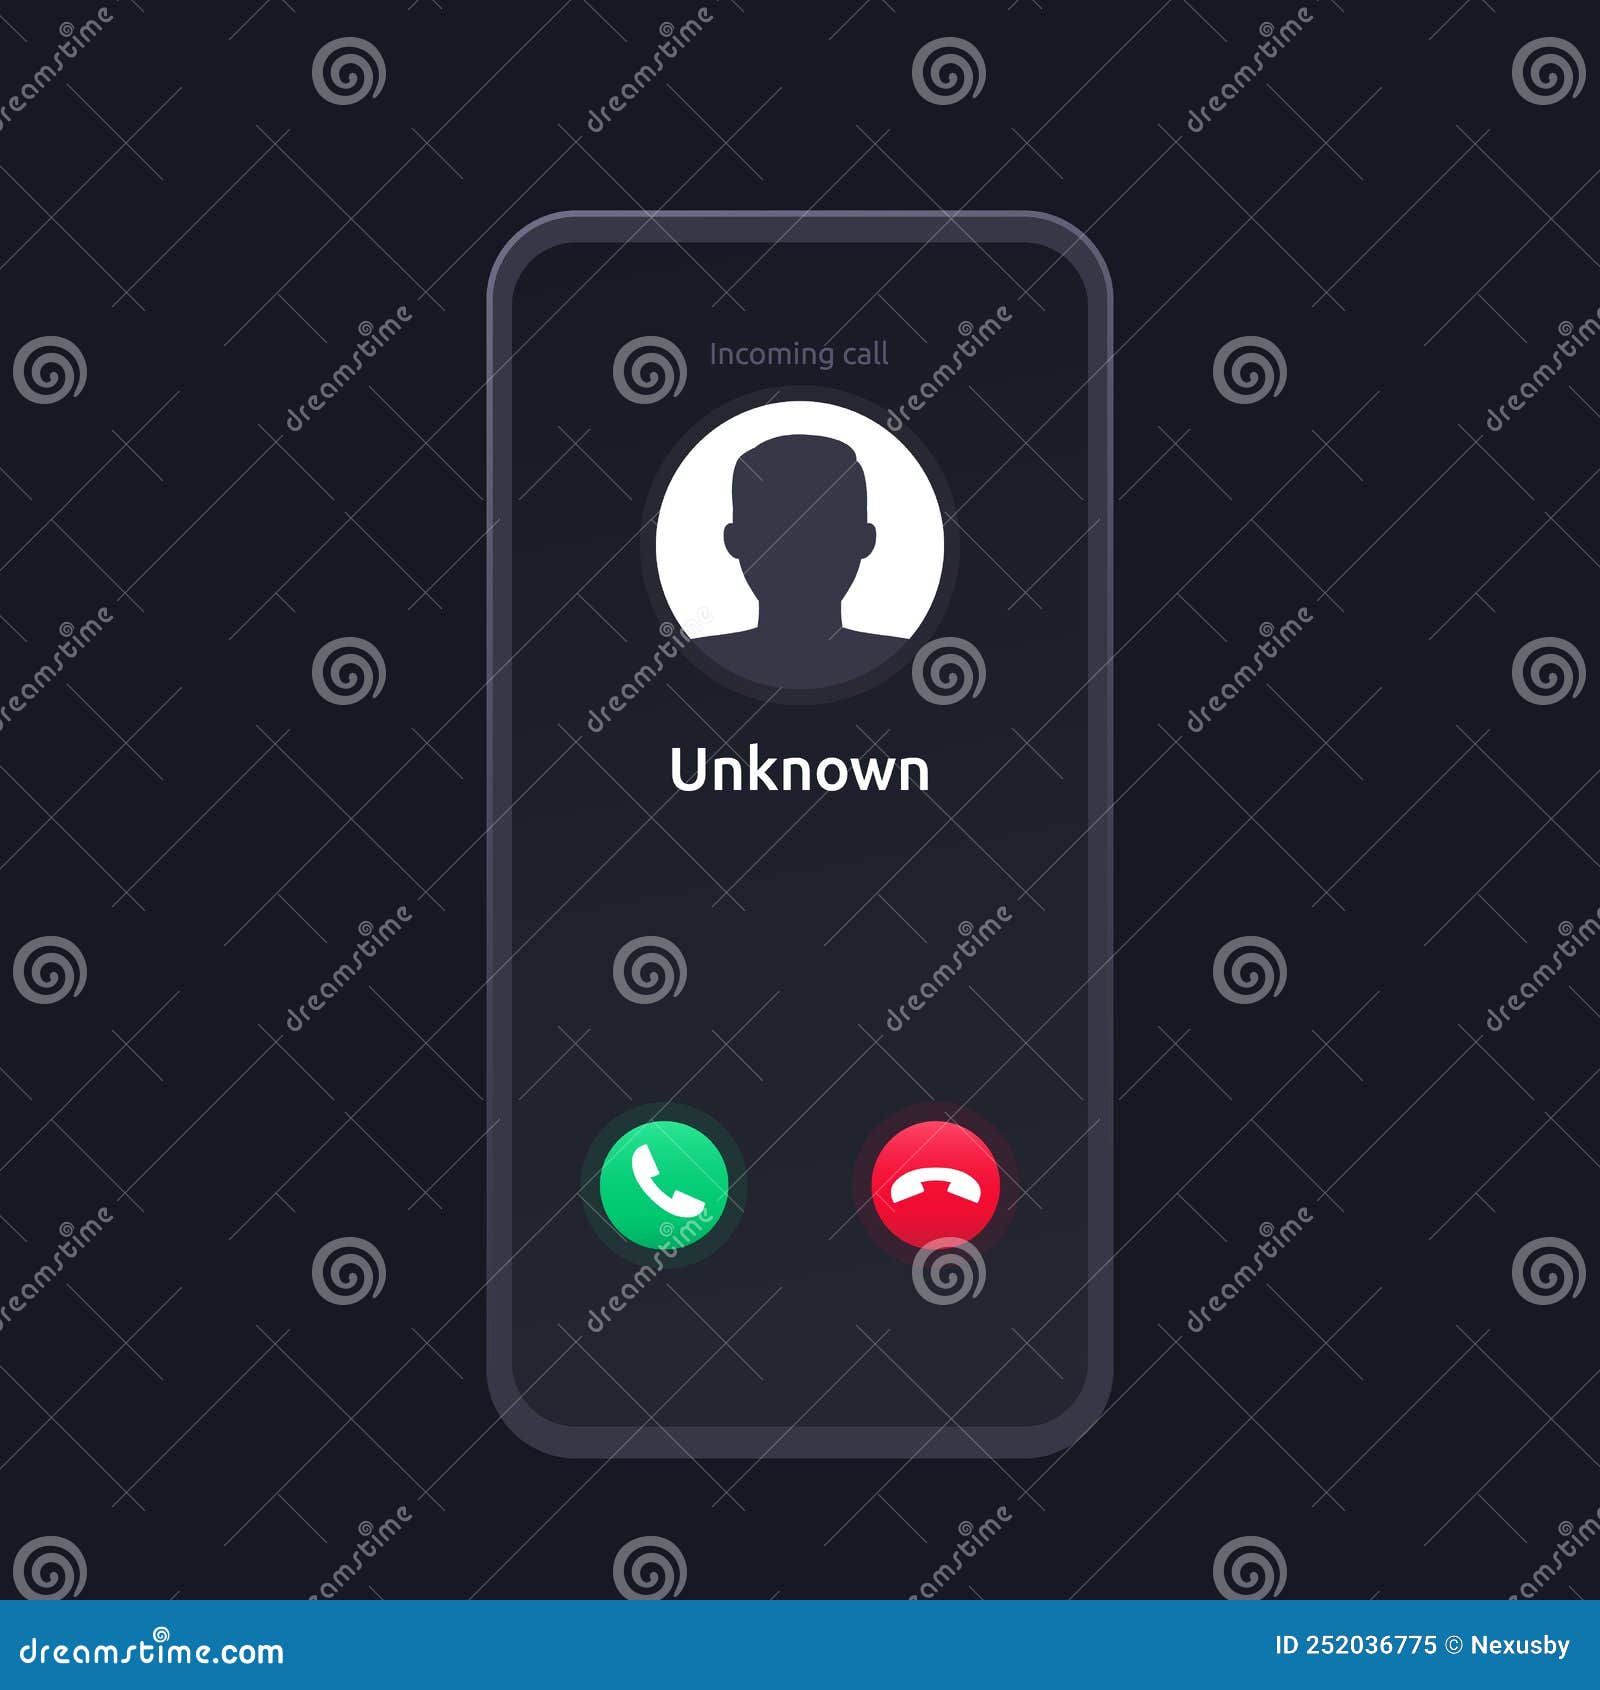 unknown caller, scam phone call,  interface